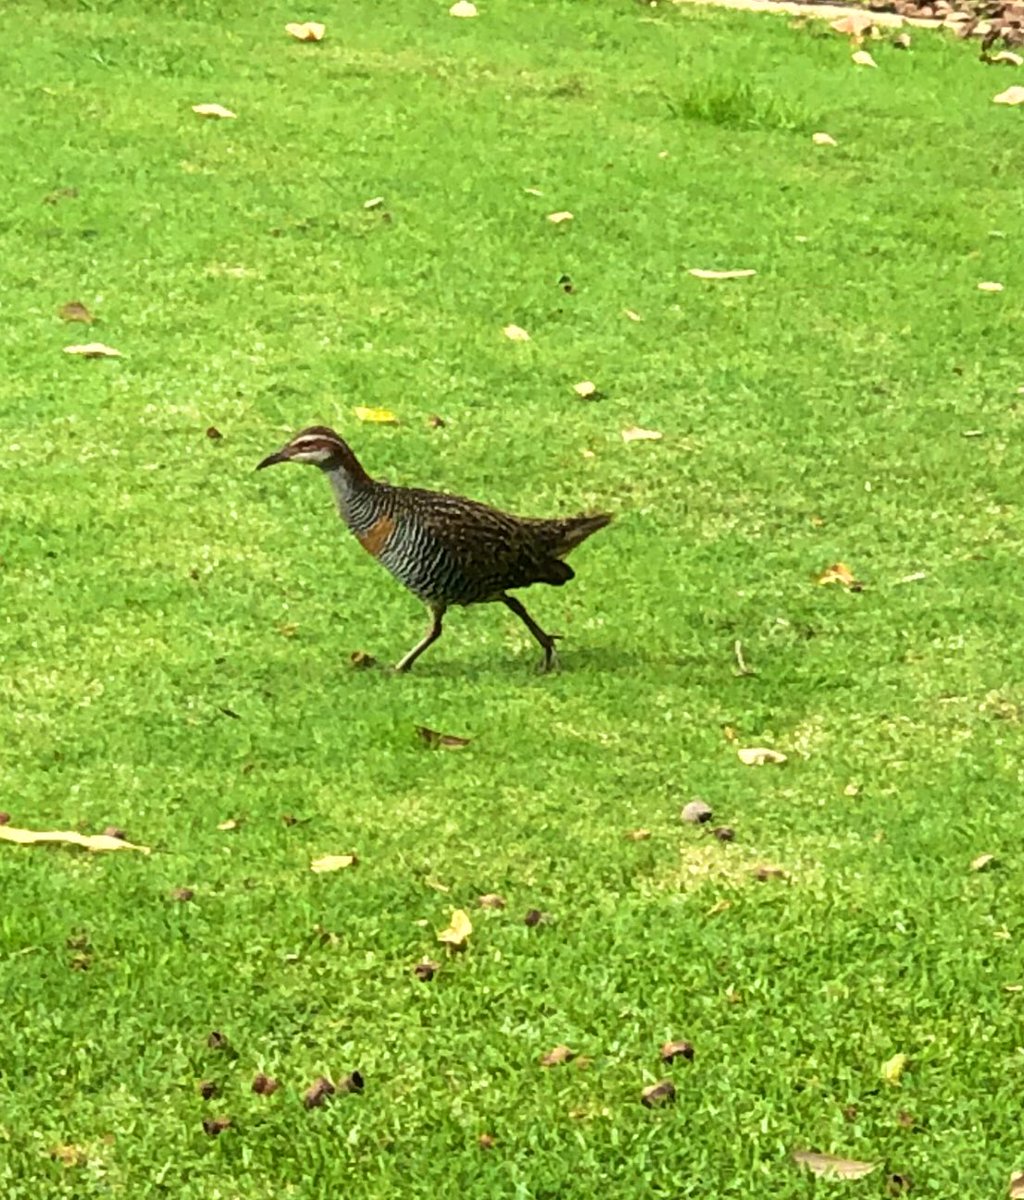 The campus Buff-banded rails are feeling adventurous! What a stunning species!